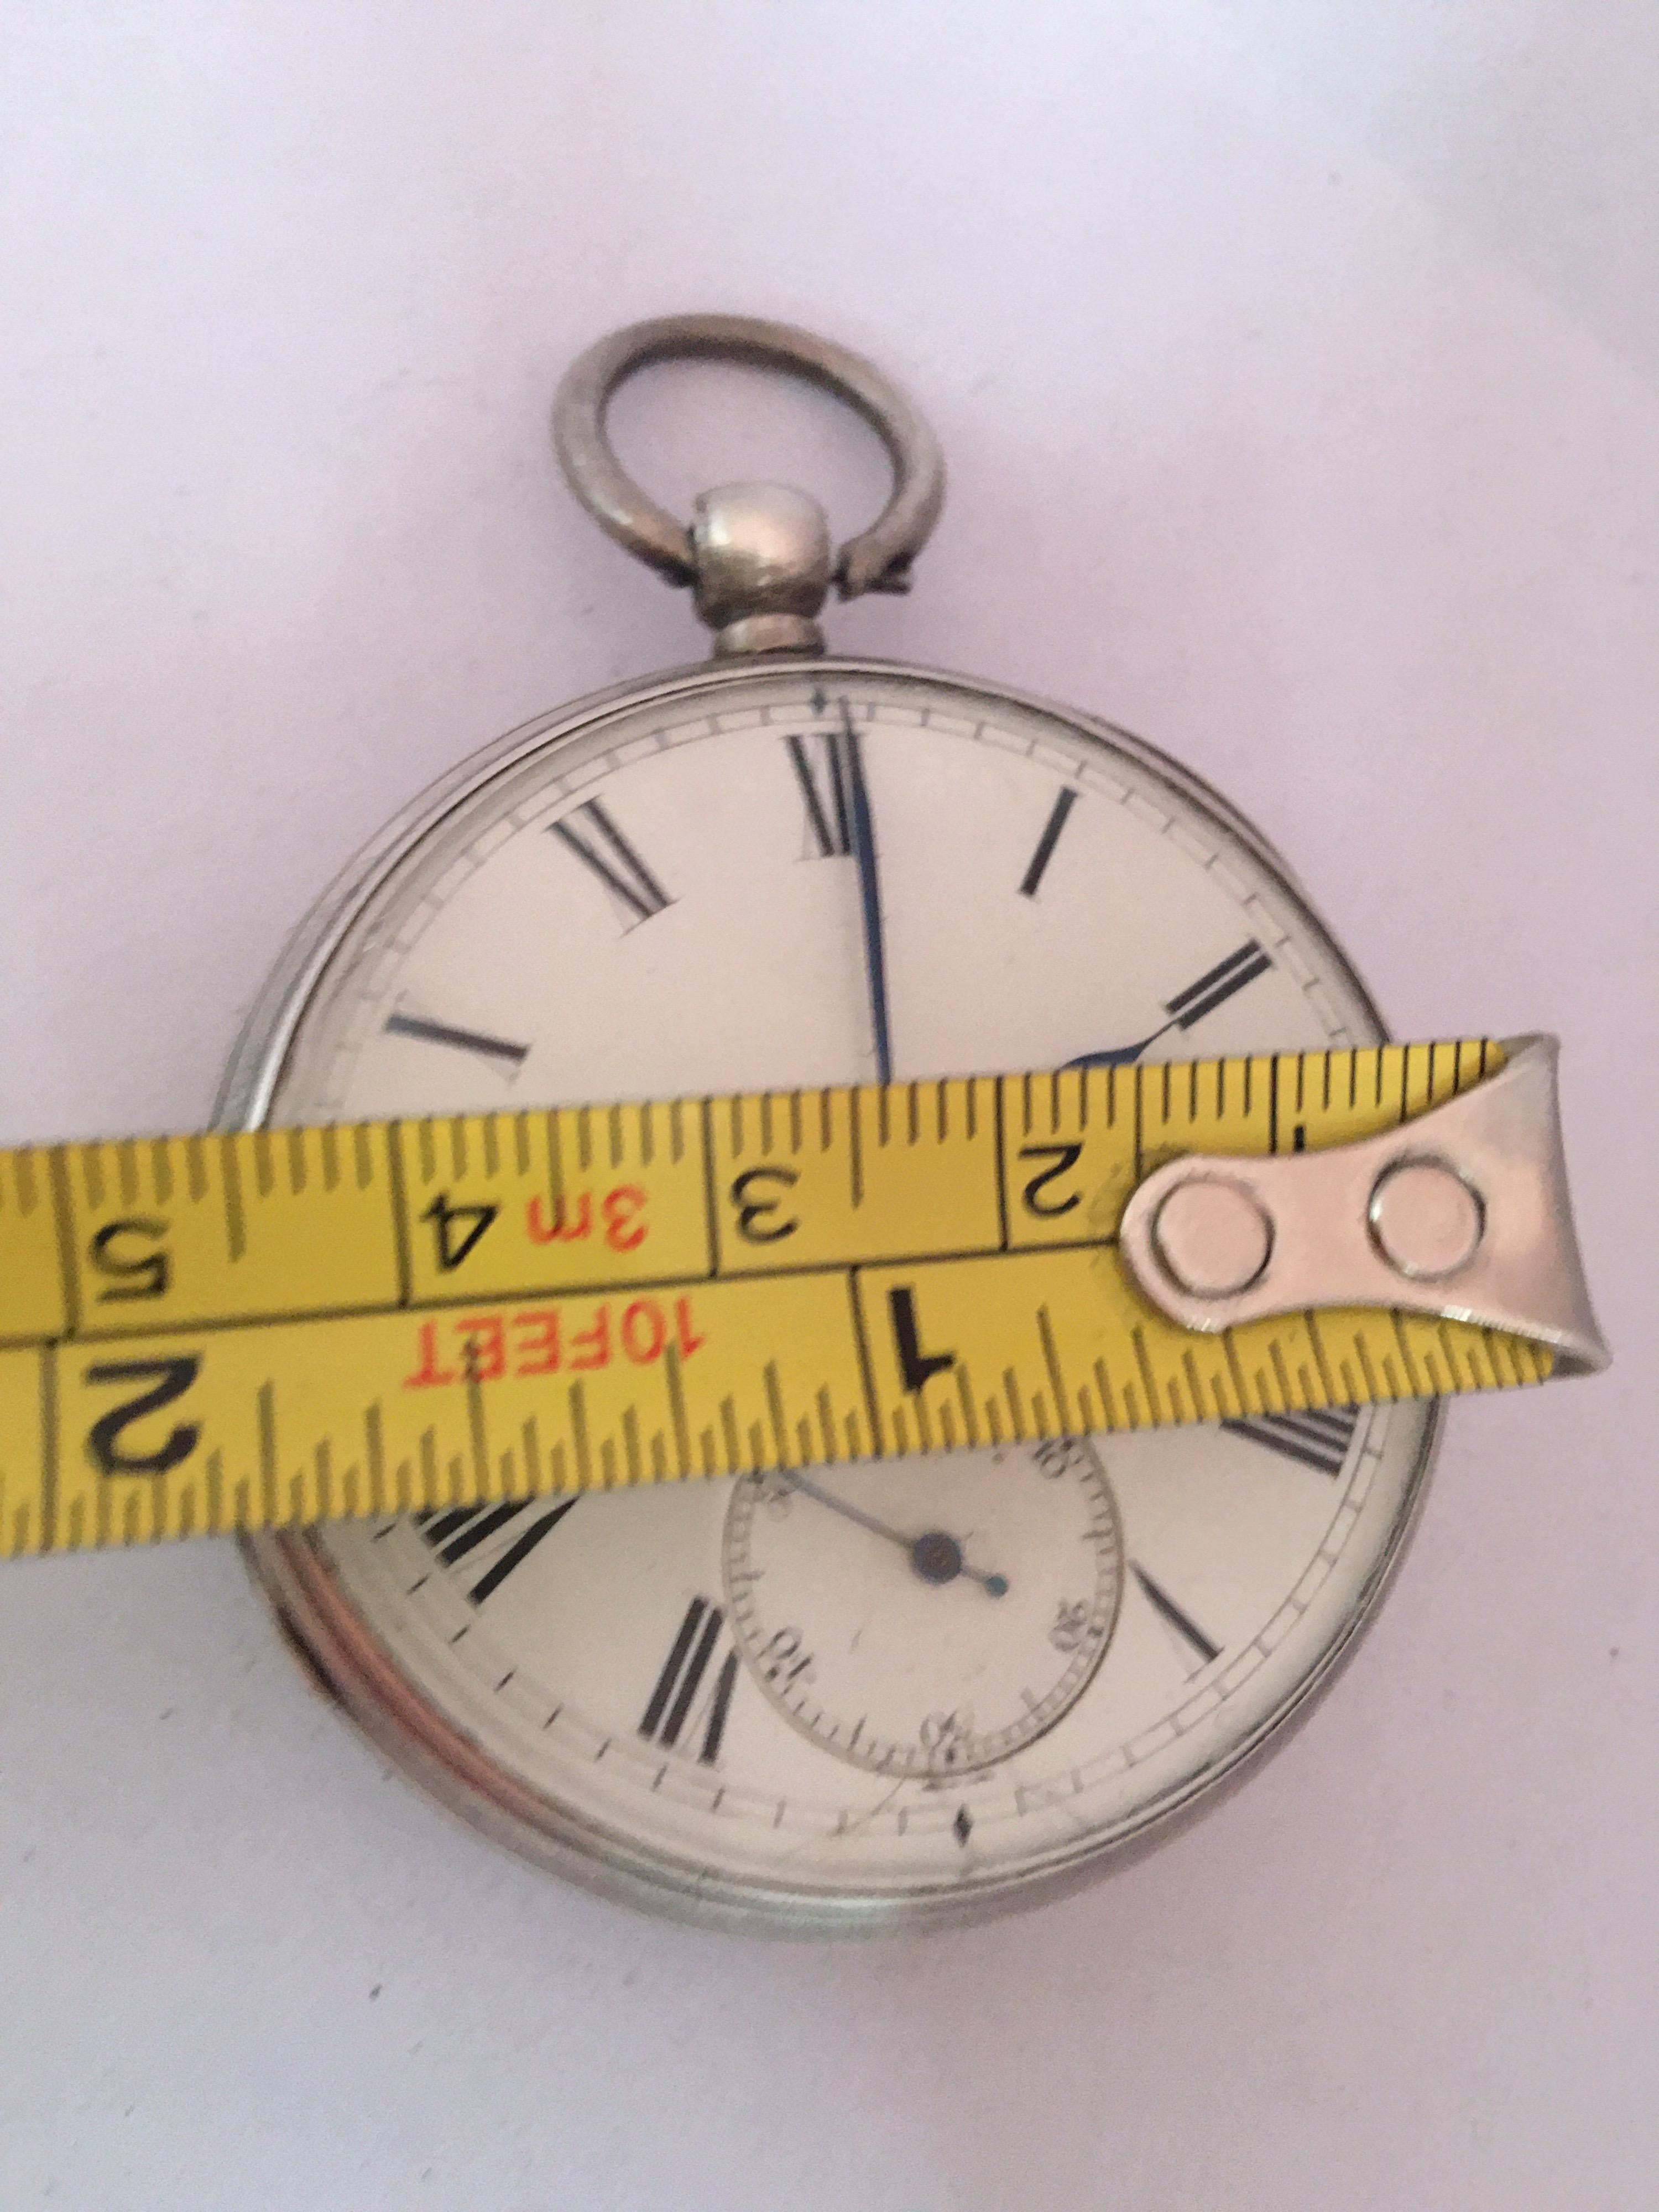 Antique Silver Key Winding Pocket Watch In Good Condition For Sale In Carlisle, GB